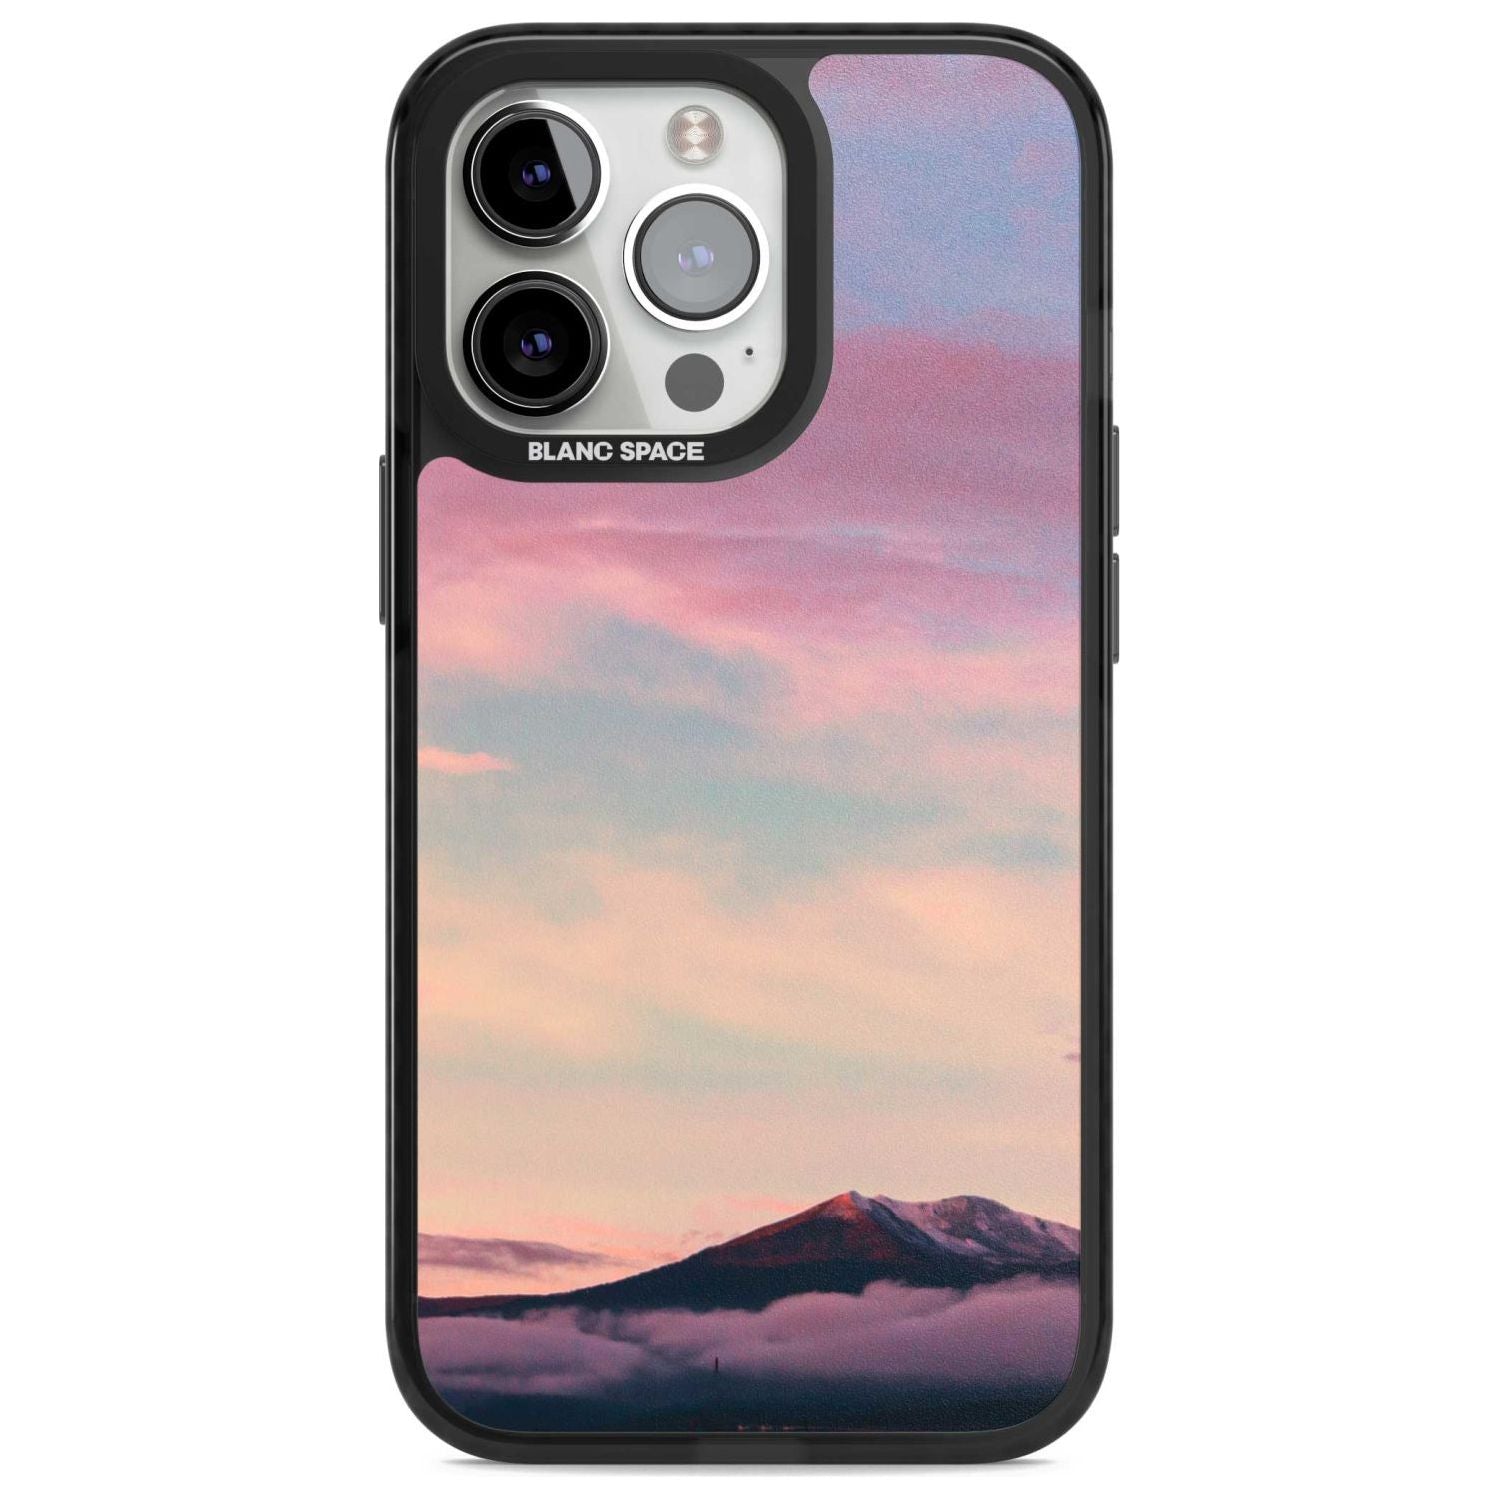 Cloudy Sunset Photograph Phone Case iPhone 15 Pro Max / Magsafe Black Impact Case,iPhone 15 Pro / Magsafe Black Impact Case,iPhone 14 Pro Max / Magsafe Black Impact Case,iPhone 14 Pro / Magsafe Black Impact Case,iPhone 13 Pro / Magsafe Black Impact Case Blanc Space